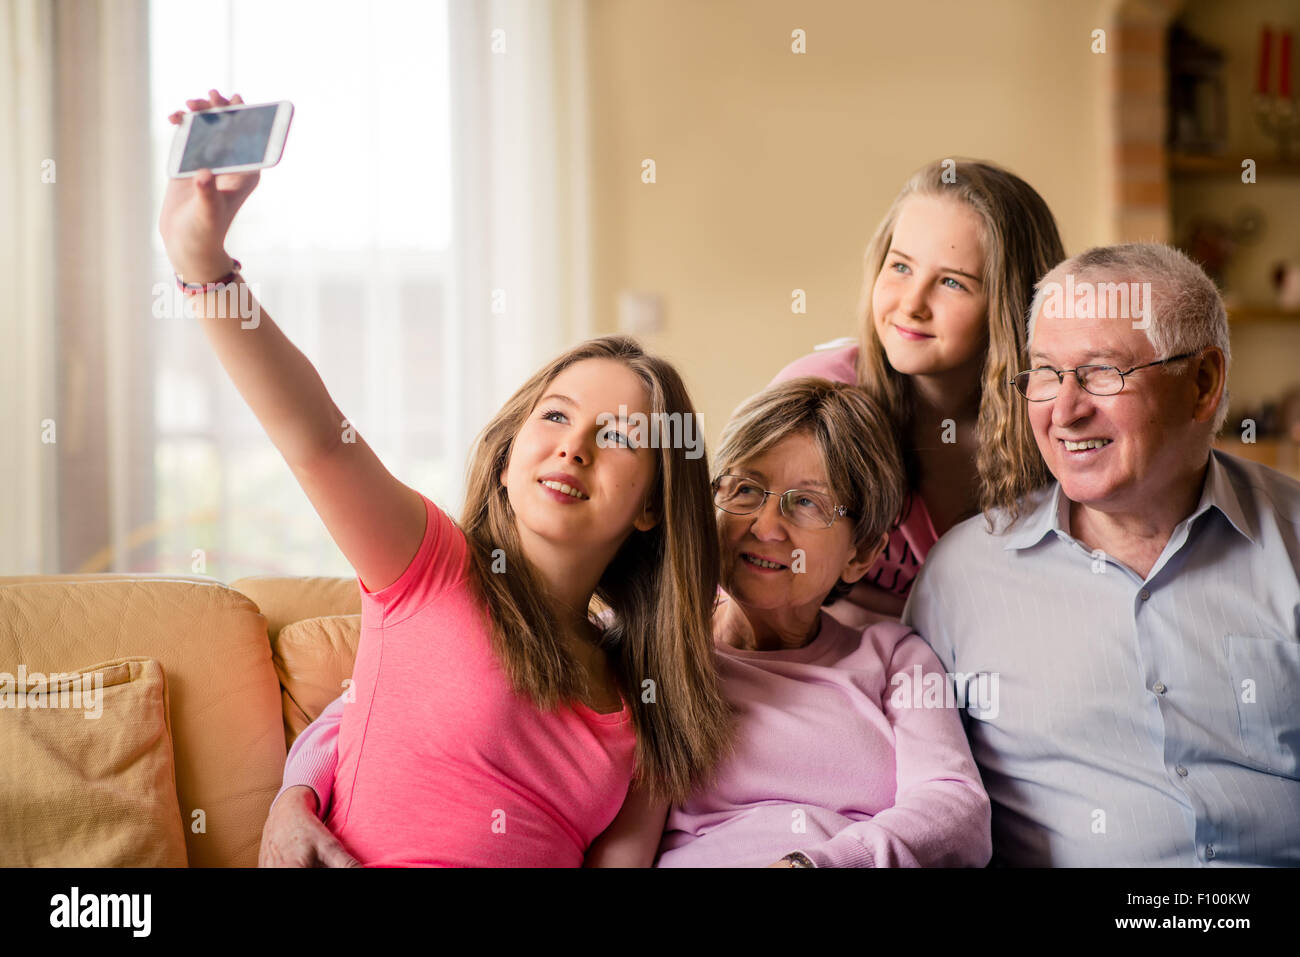 Teenage girl taking photo with mobile phone of herself, sister and her grandparents at home on sofa Stock Photo